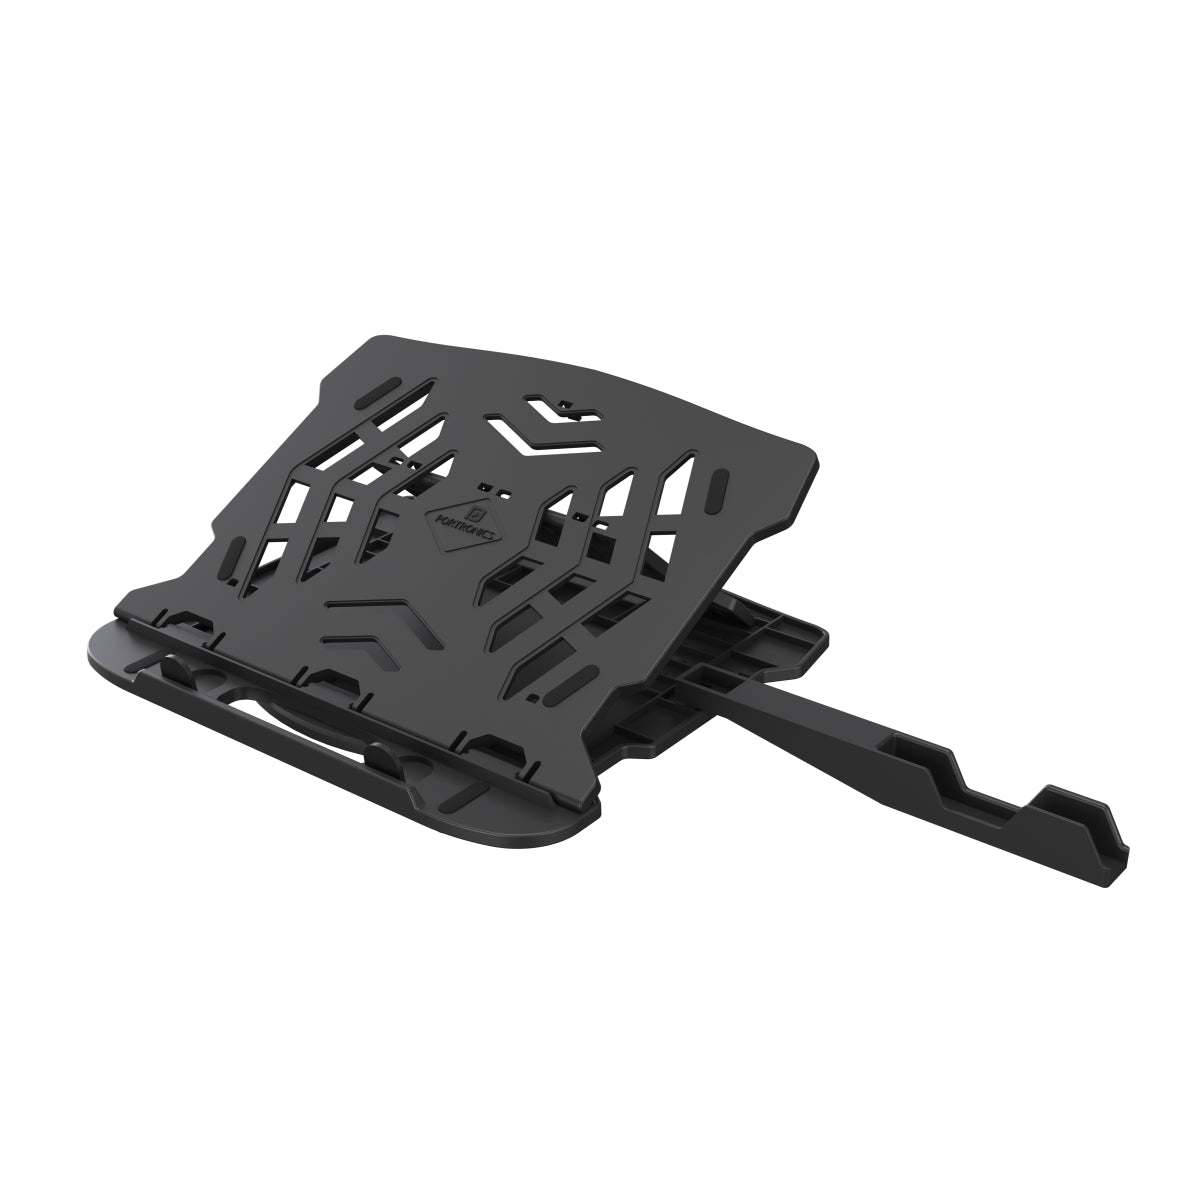 PORTRONICS-Portable-Laptop-Stand-(Black)-With-7-Adjustable-Angles